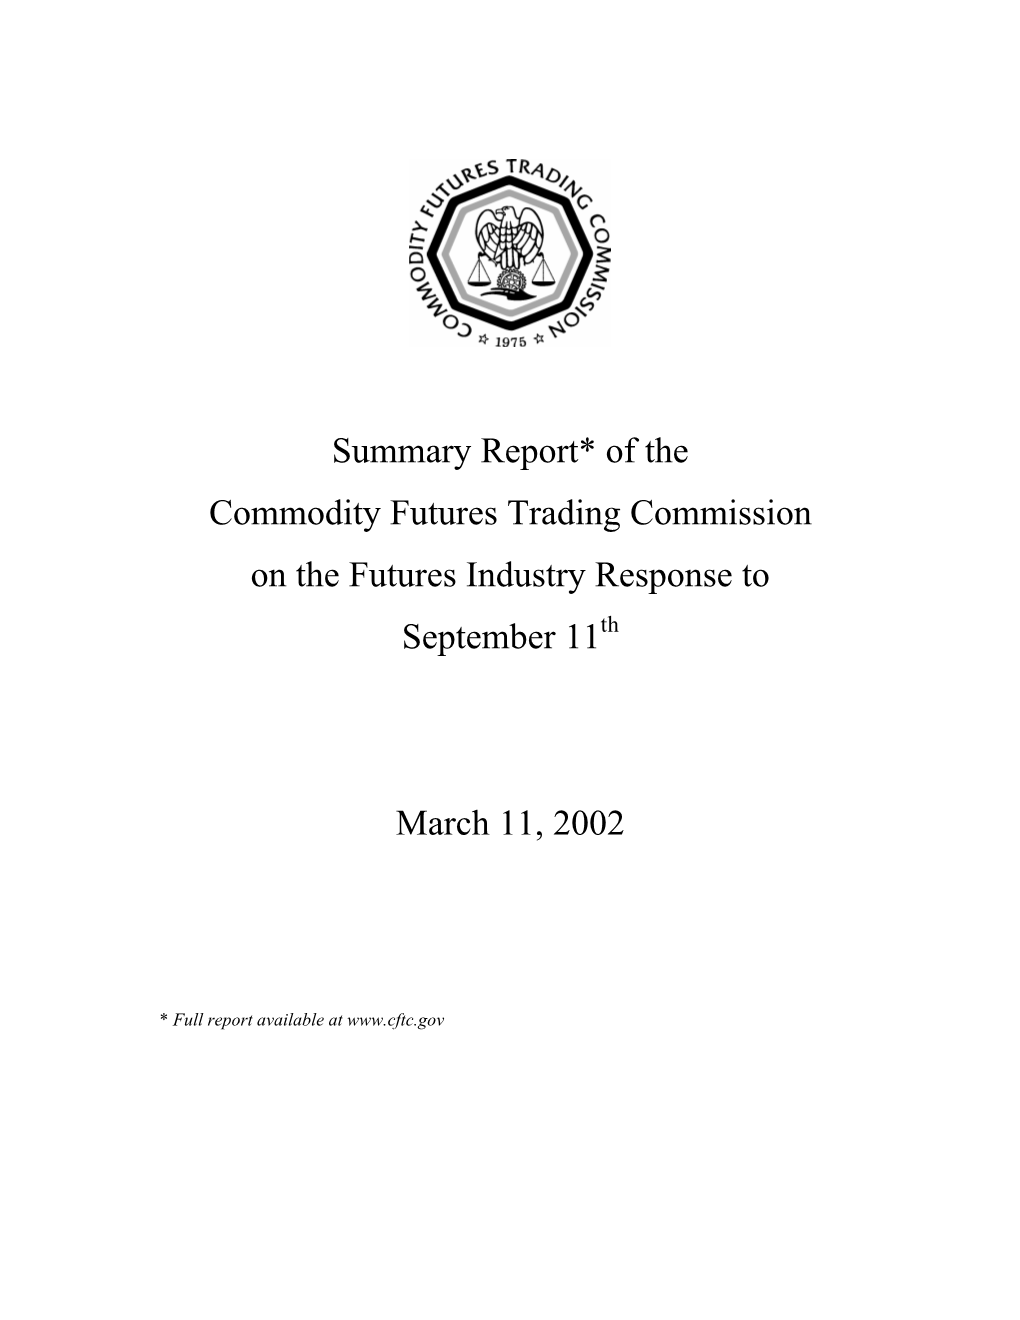 Summary Report* of the Commodity Futures Trading Commission on the Futures Industry Response to September 11Th